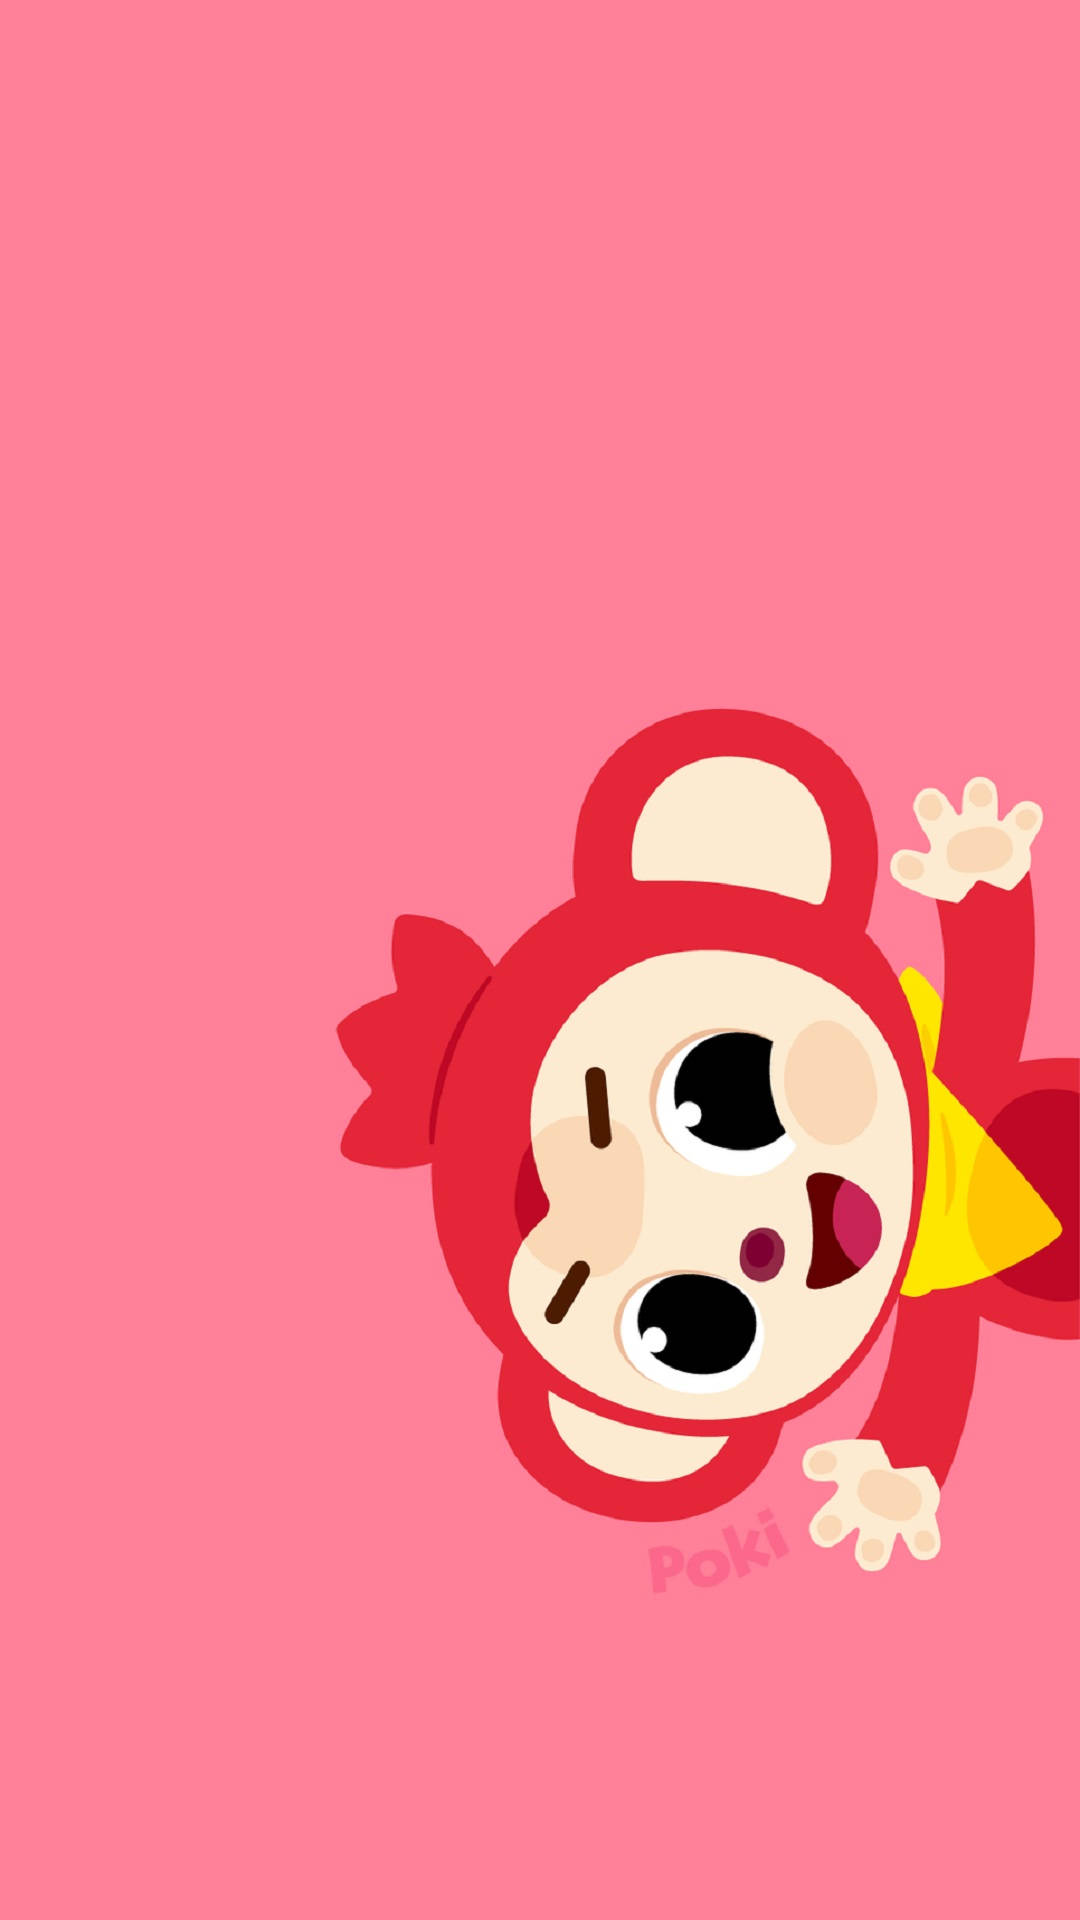 Pinkfong Poki Red Art Background